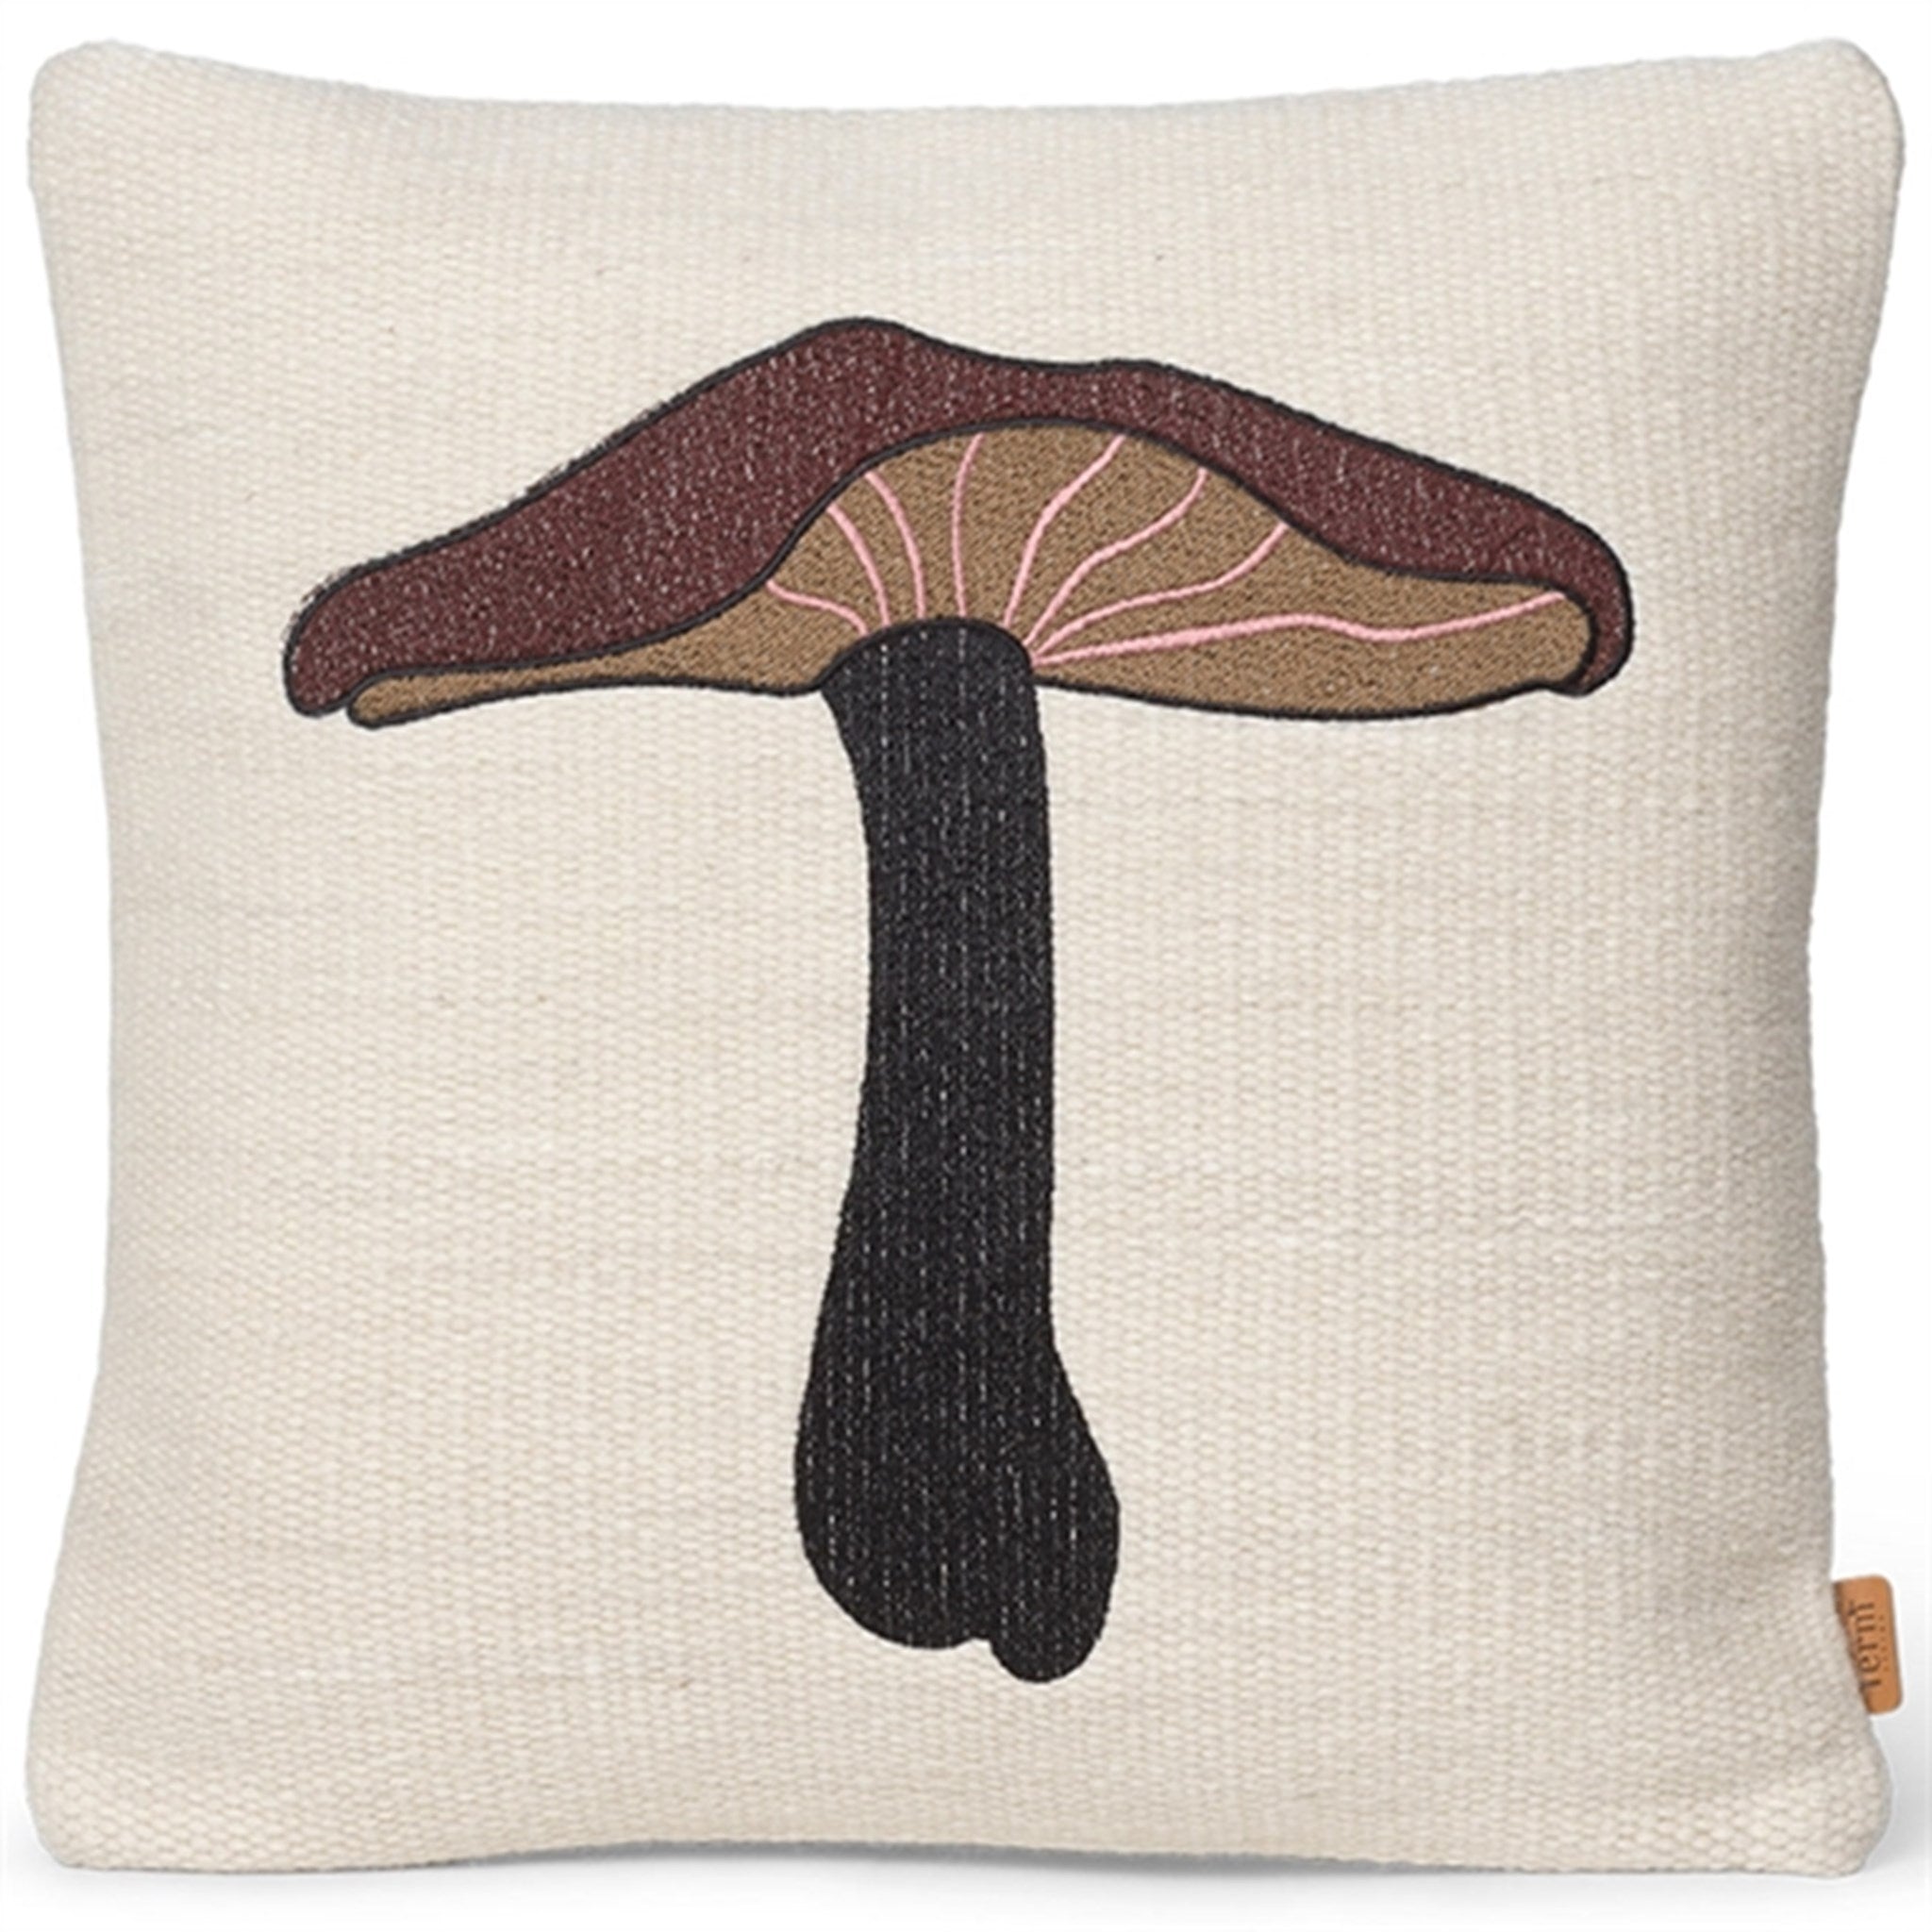 Ferm Living Forest Embroidered Cushion Lactarius